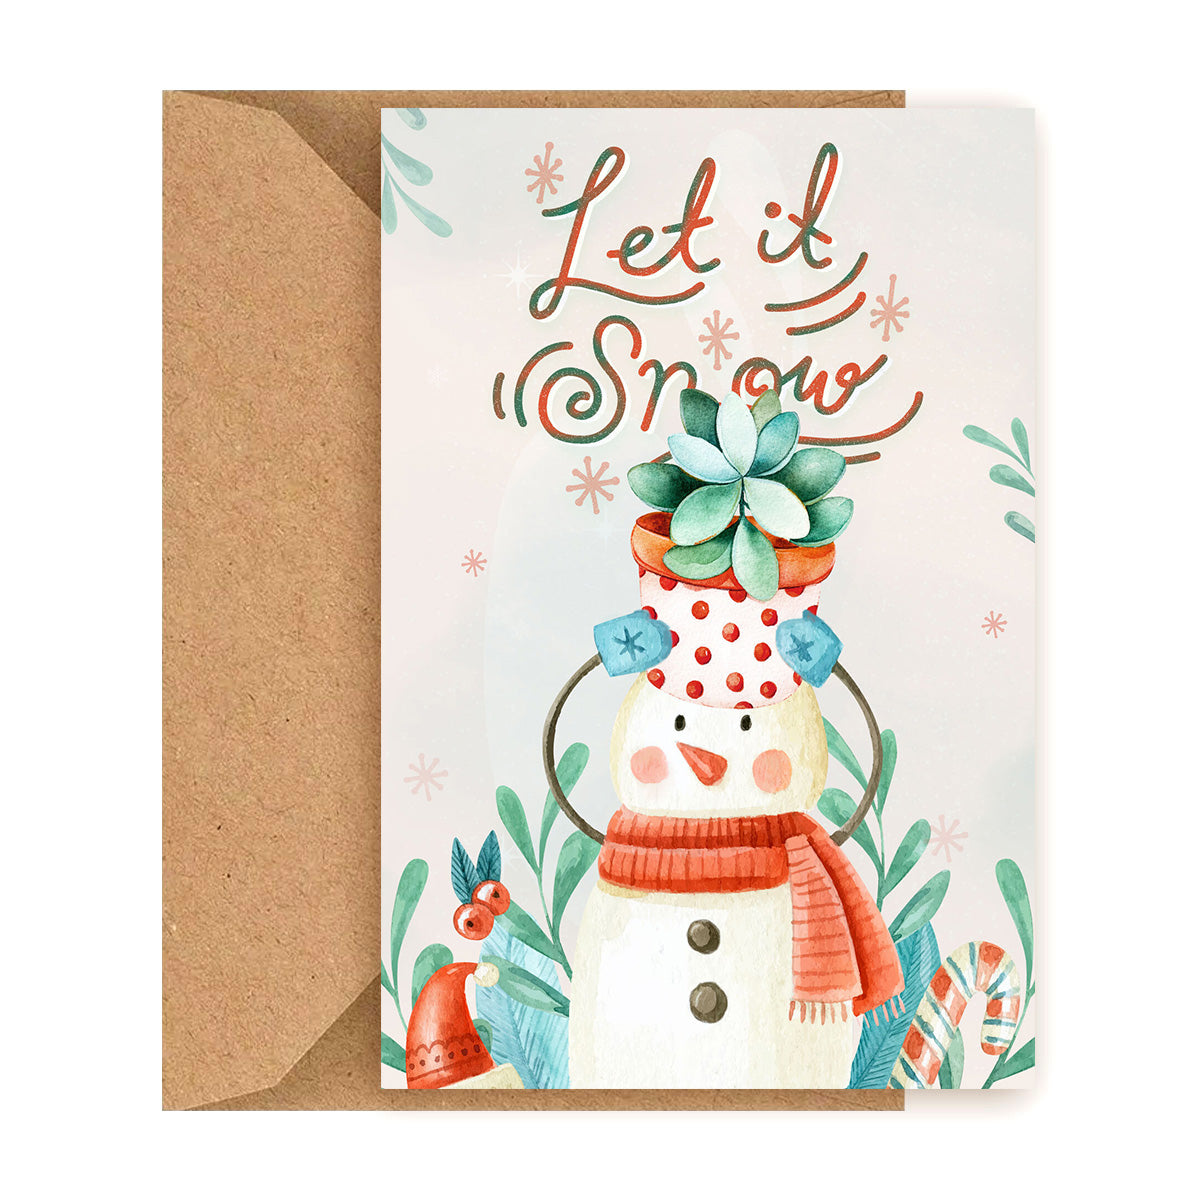 succulent greeting cards for sale online, Let it snow card for sale, Christmas gift decor ideas